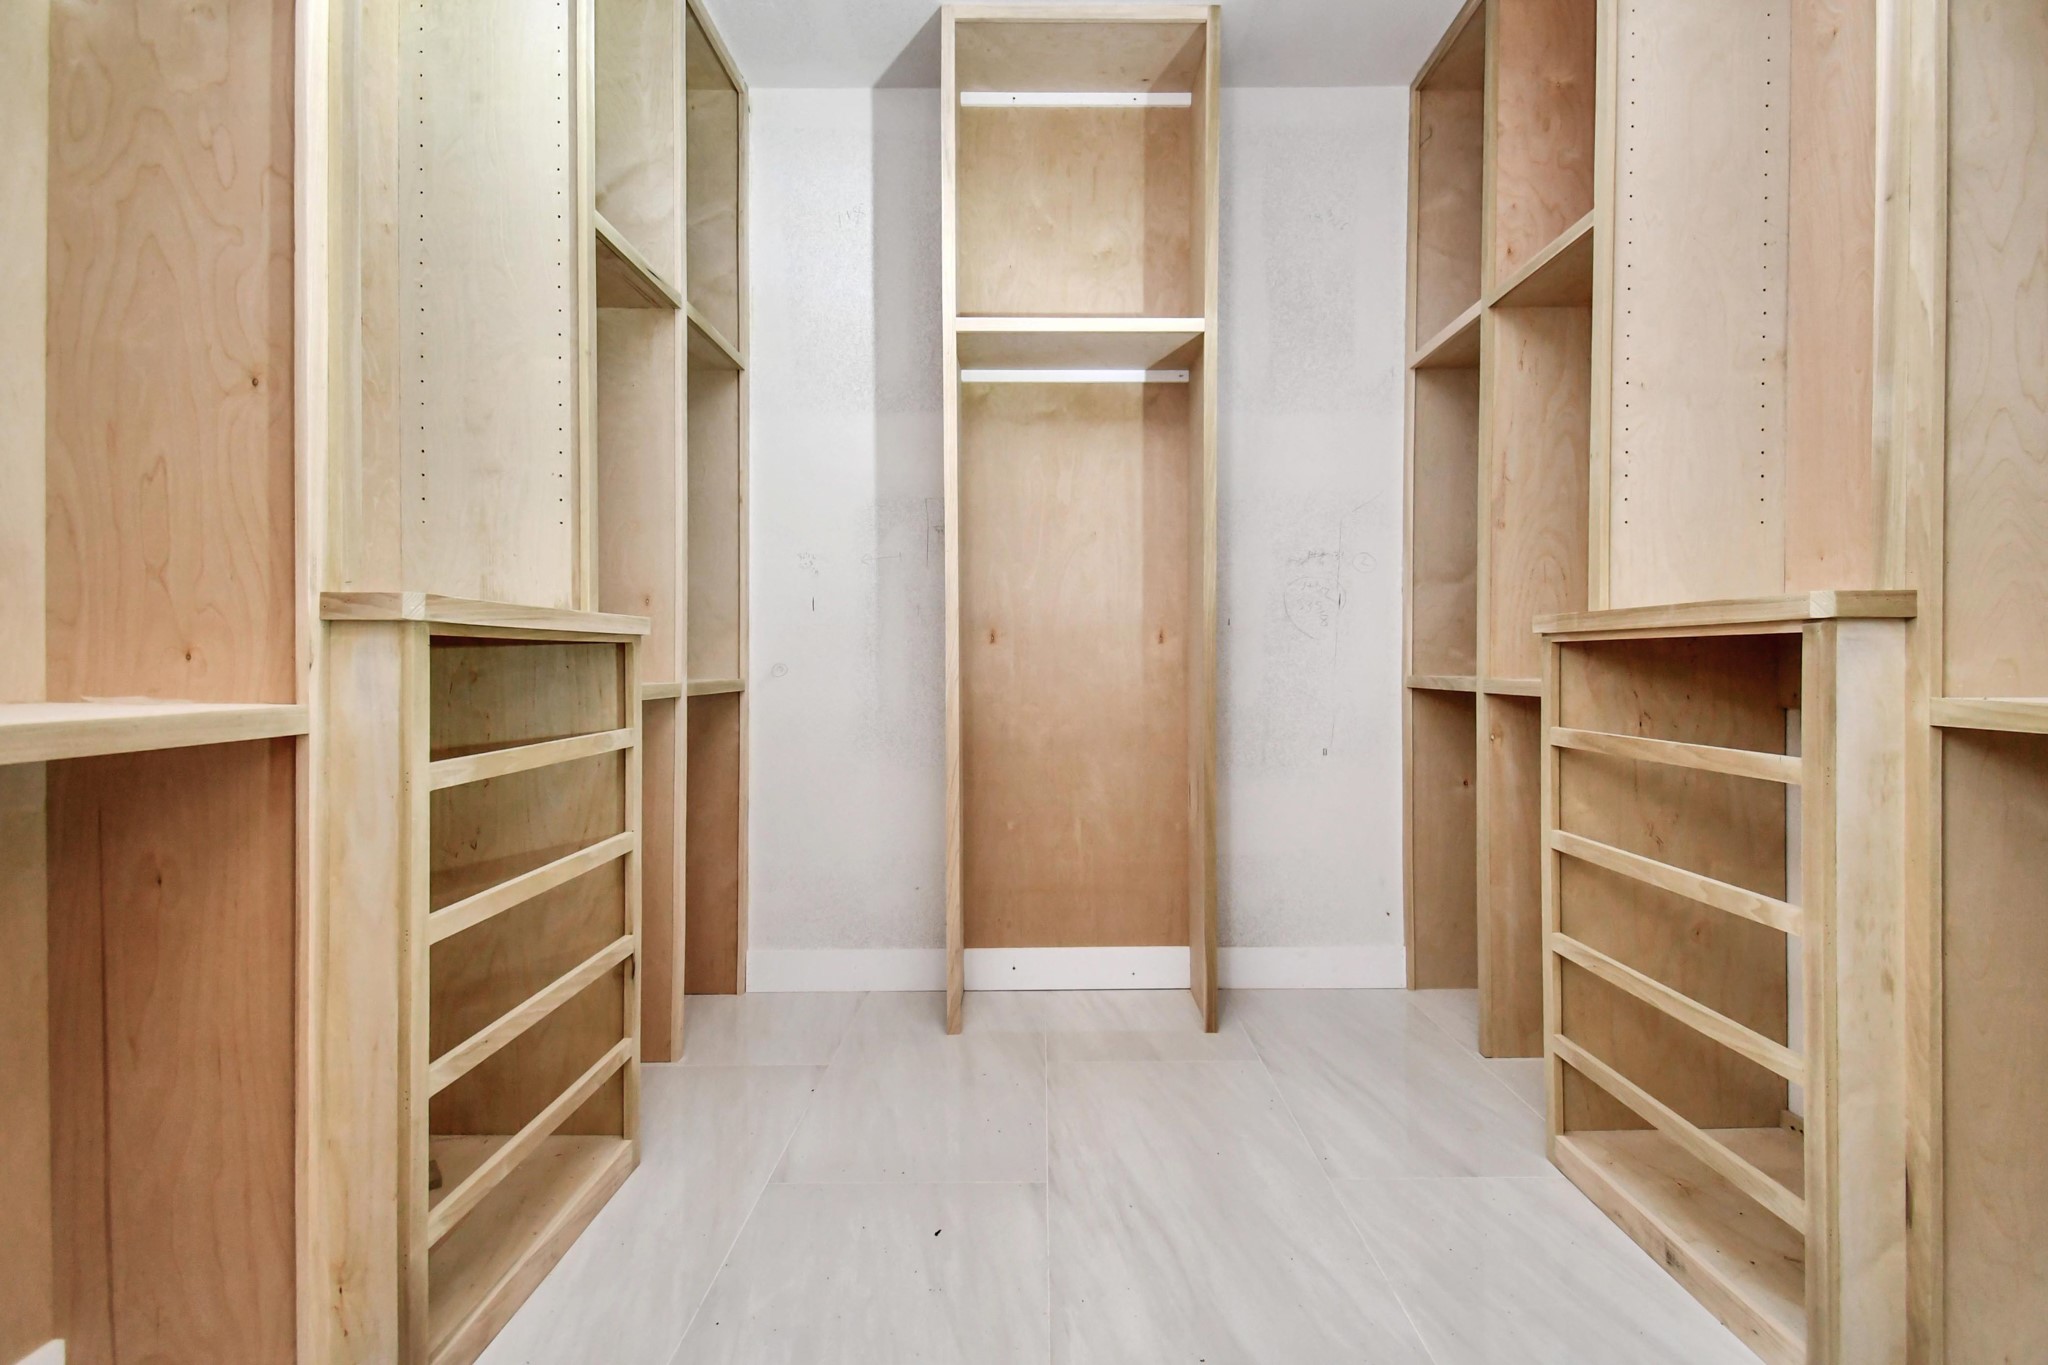 The larger of the 2 closets located in the primary bedroom.